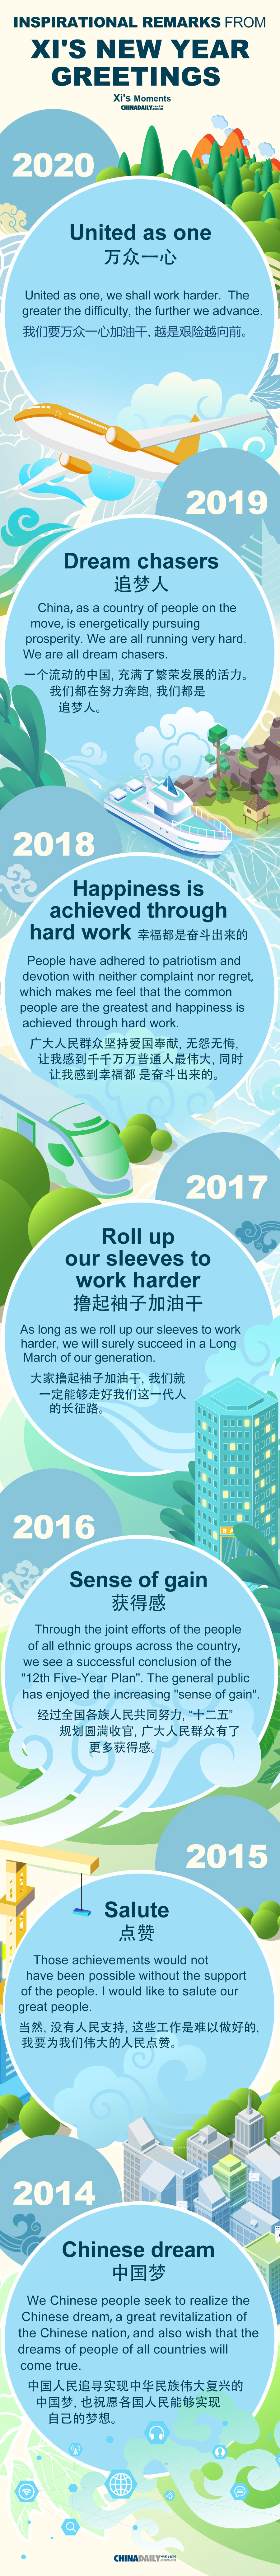 Inspirational Remarks from Xi's New Year Greetings